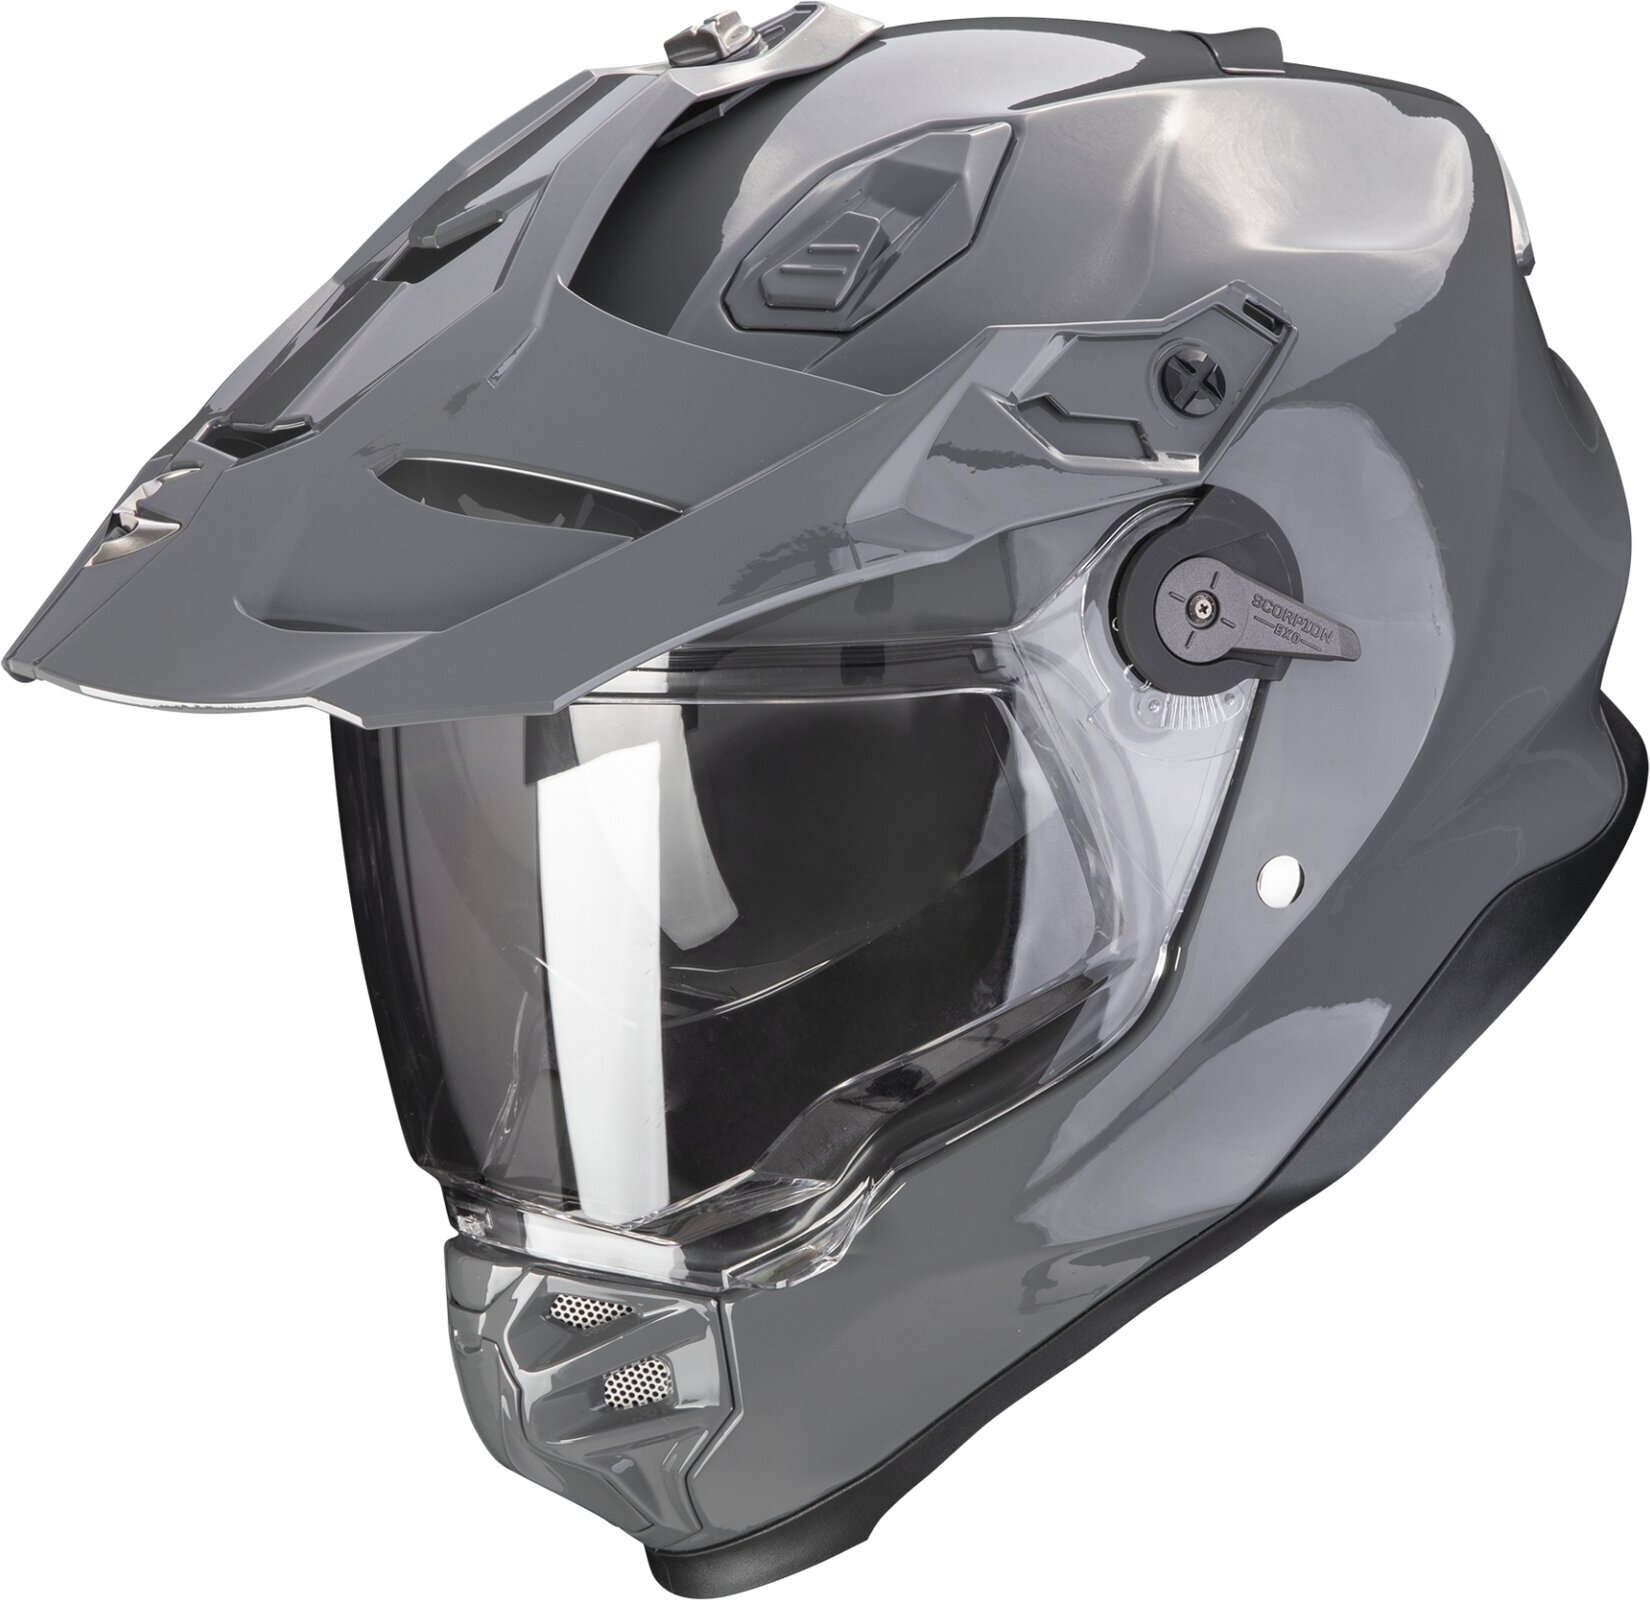 Kask Scorpion ADF-9000 AIR SOLID Cement Grey L Kask